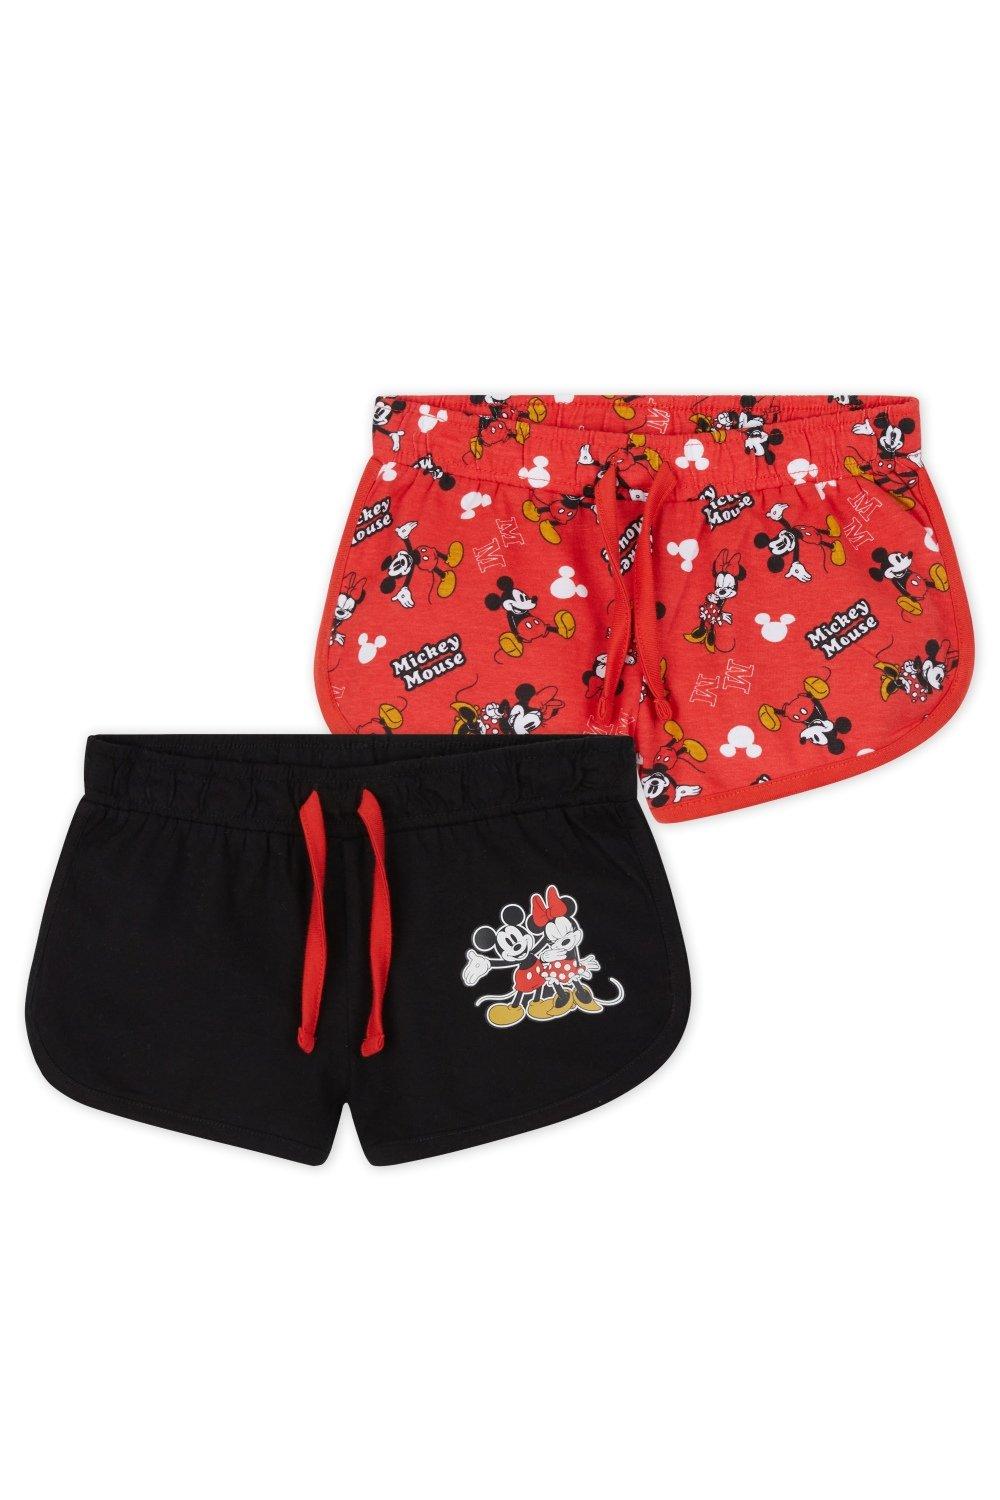 Mickey And Minnie 2 Pack Shorts